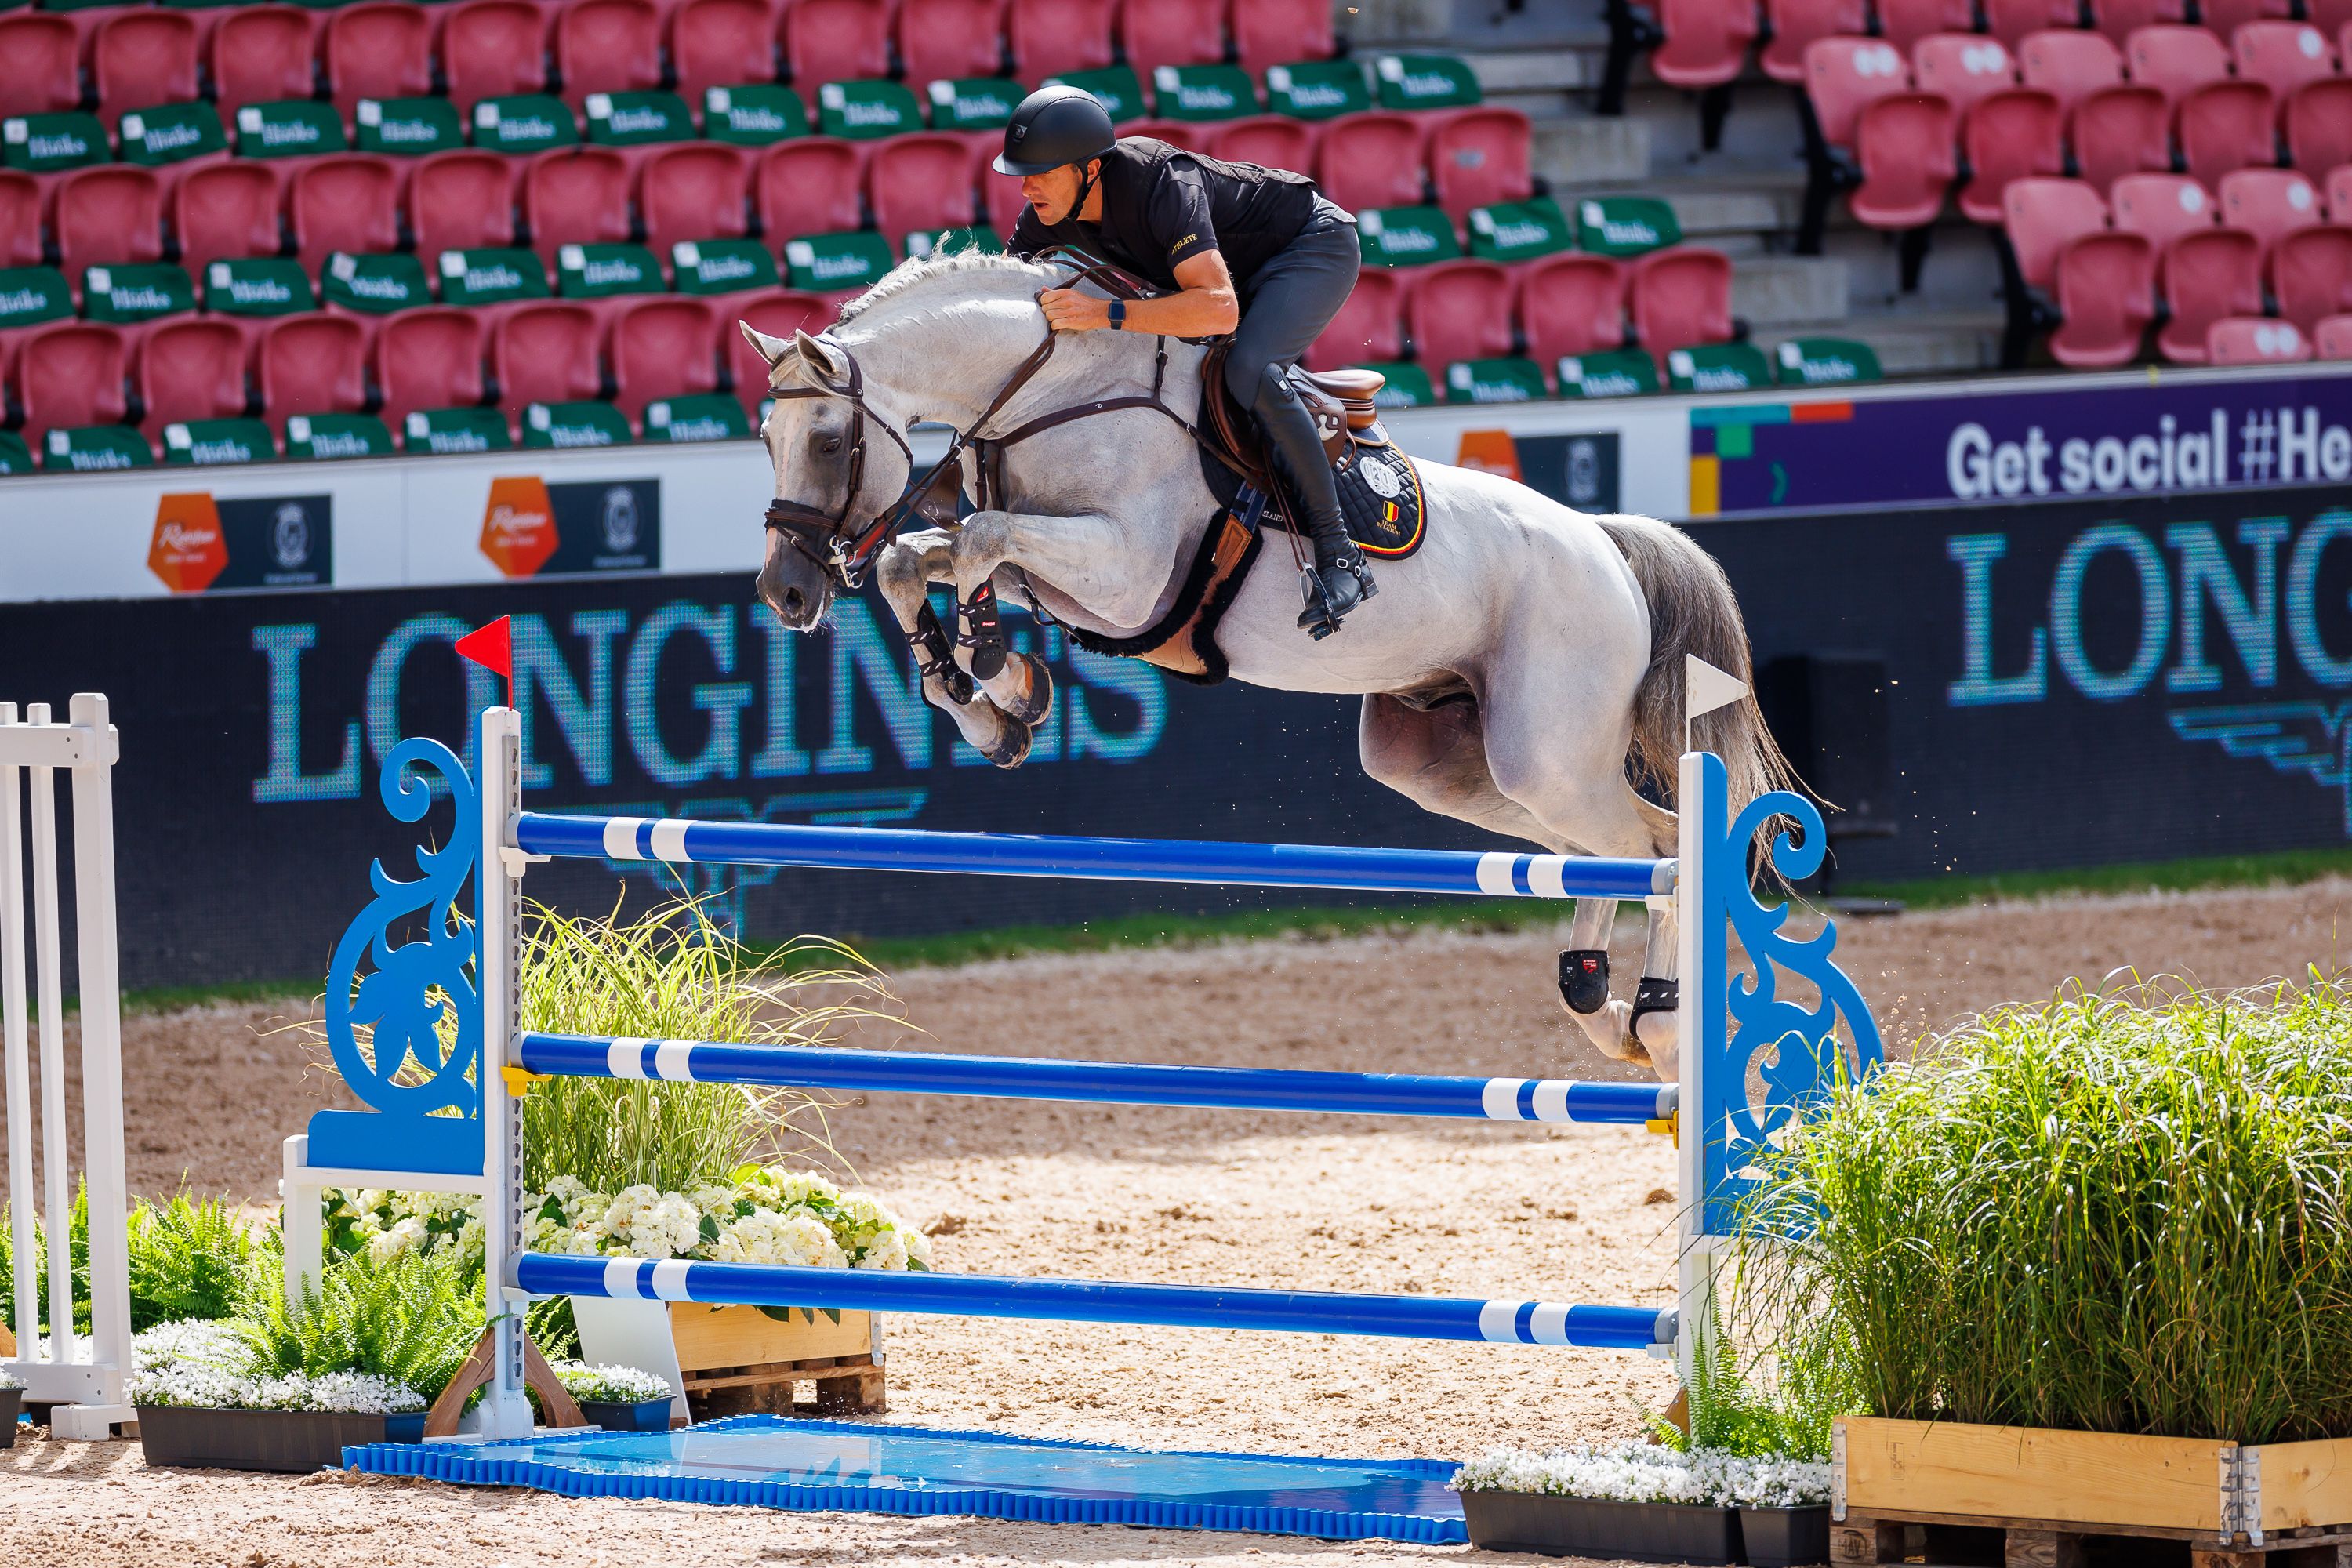 Your guide for the 2022 WEG Showjumping in Herning!